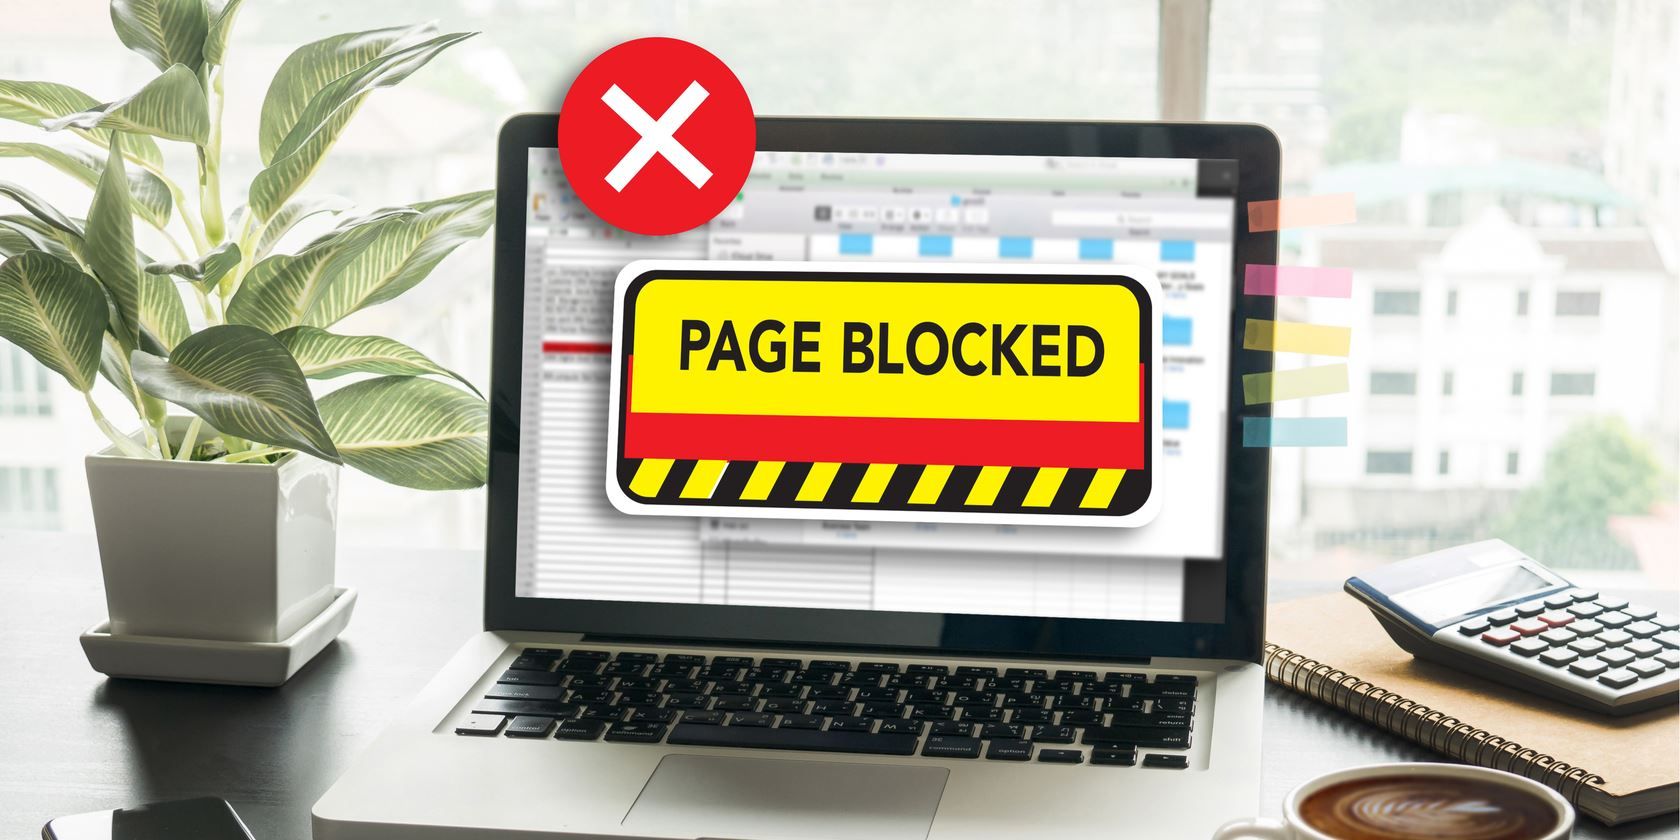 A Page Blocked message displayed on a laptop.